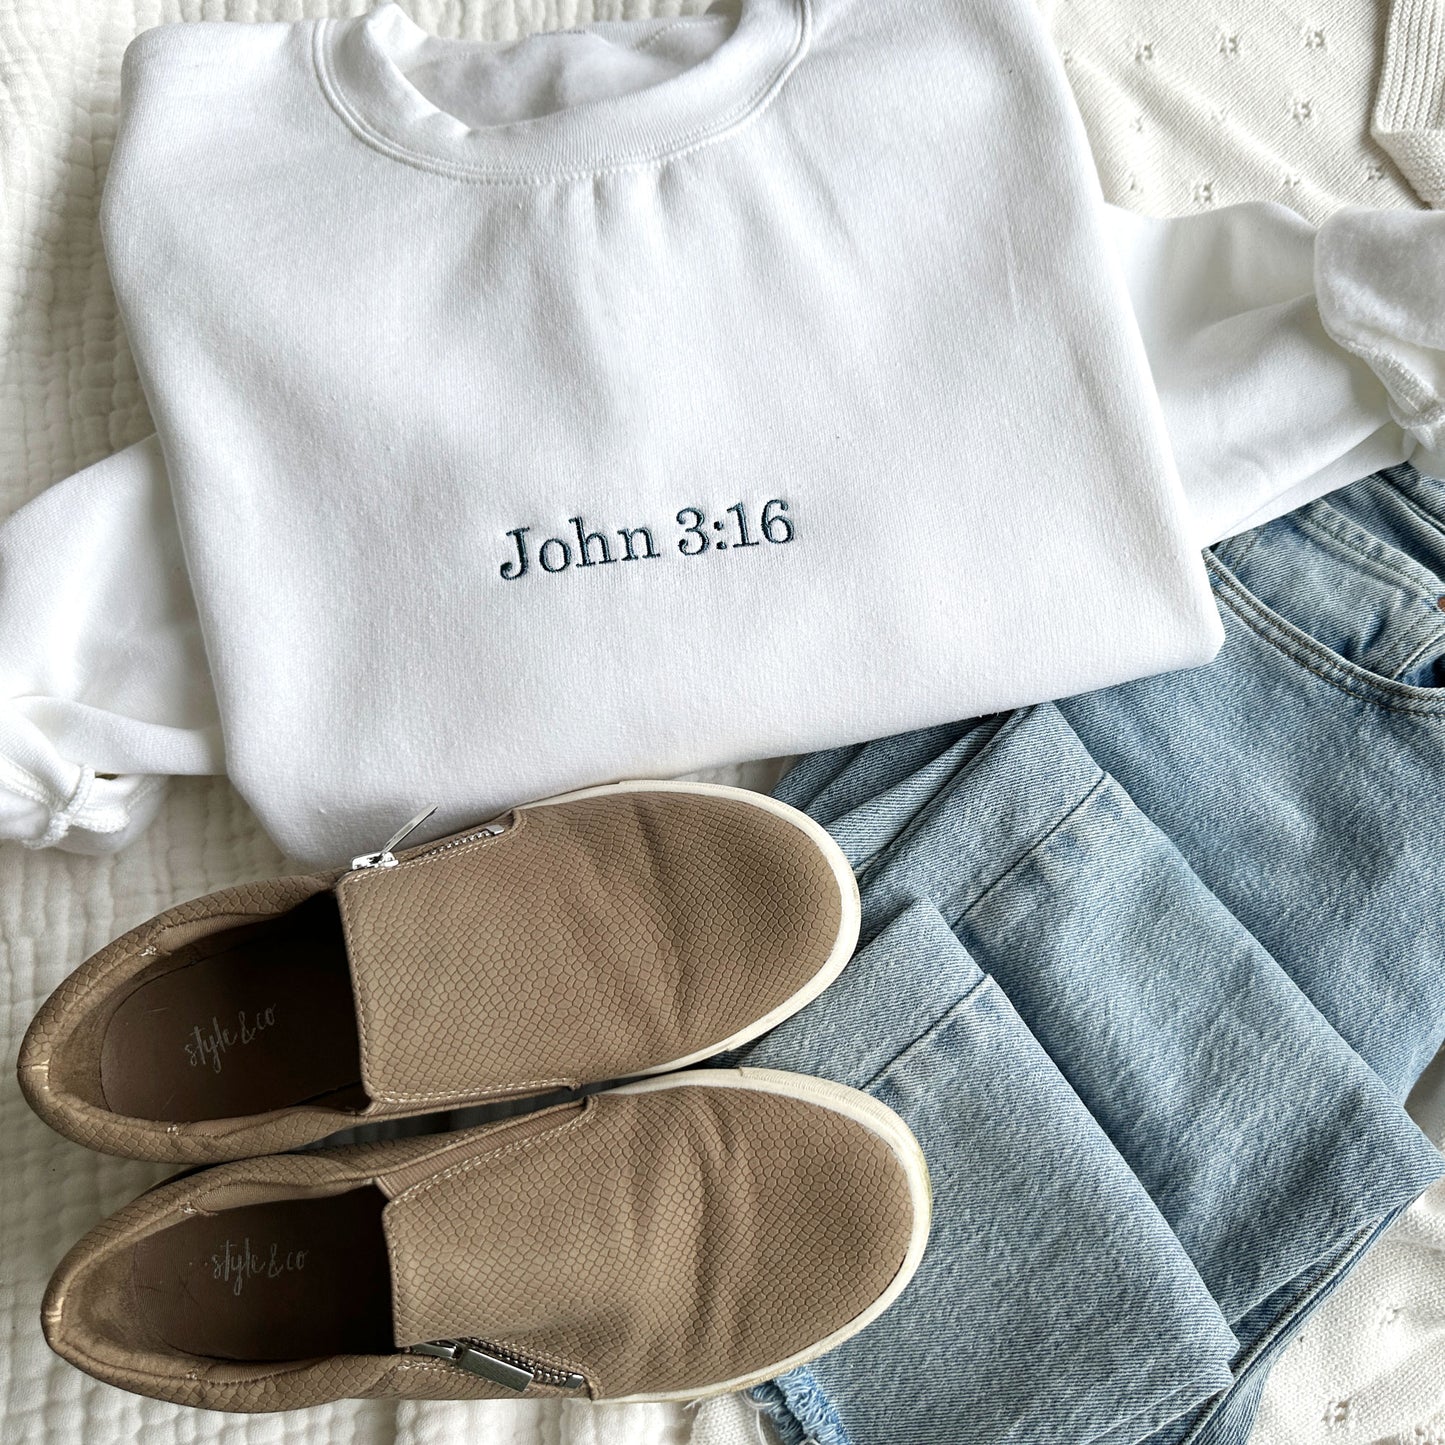 white crewneck sweatshirt with bible verse John 3:16 embroidered in french blue thread and sneakers